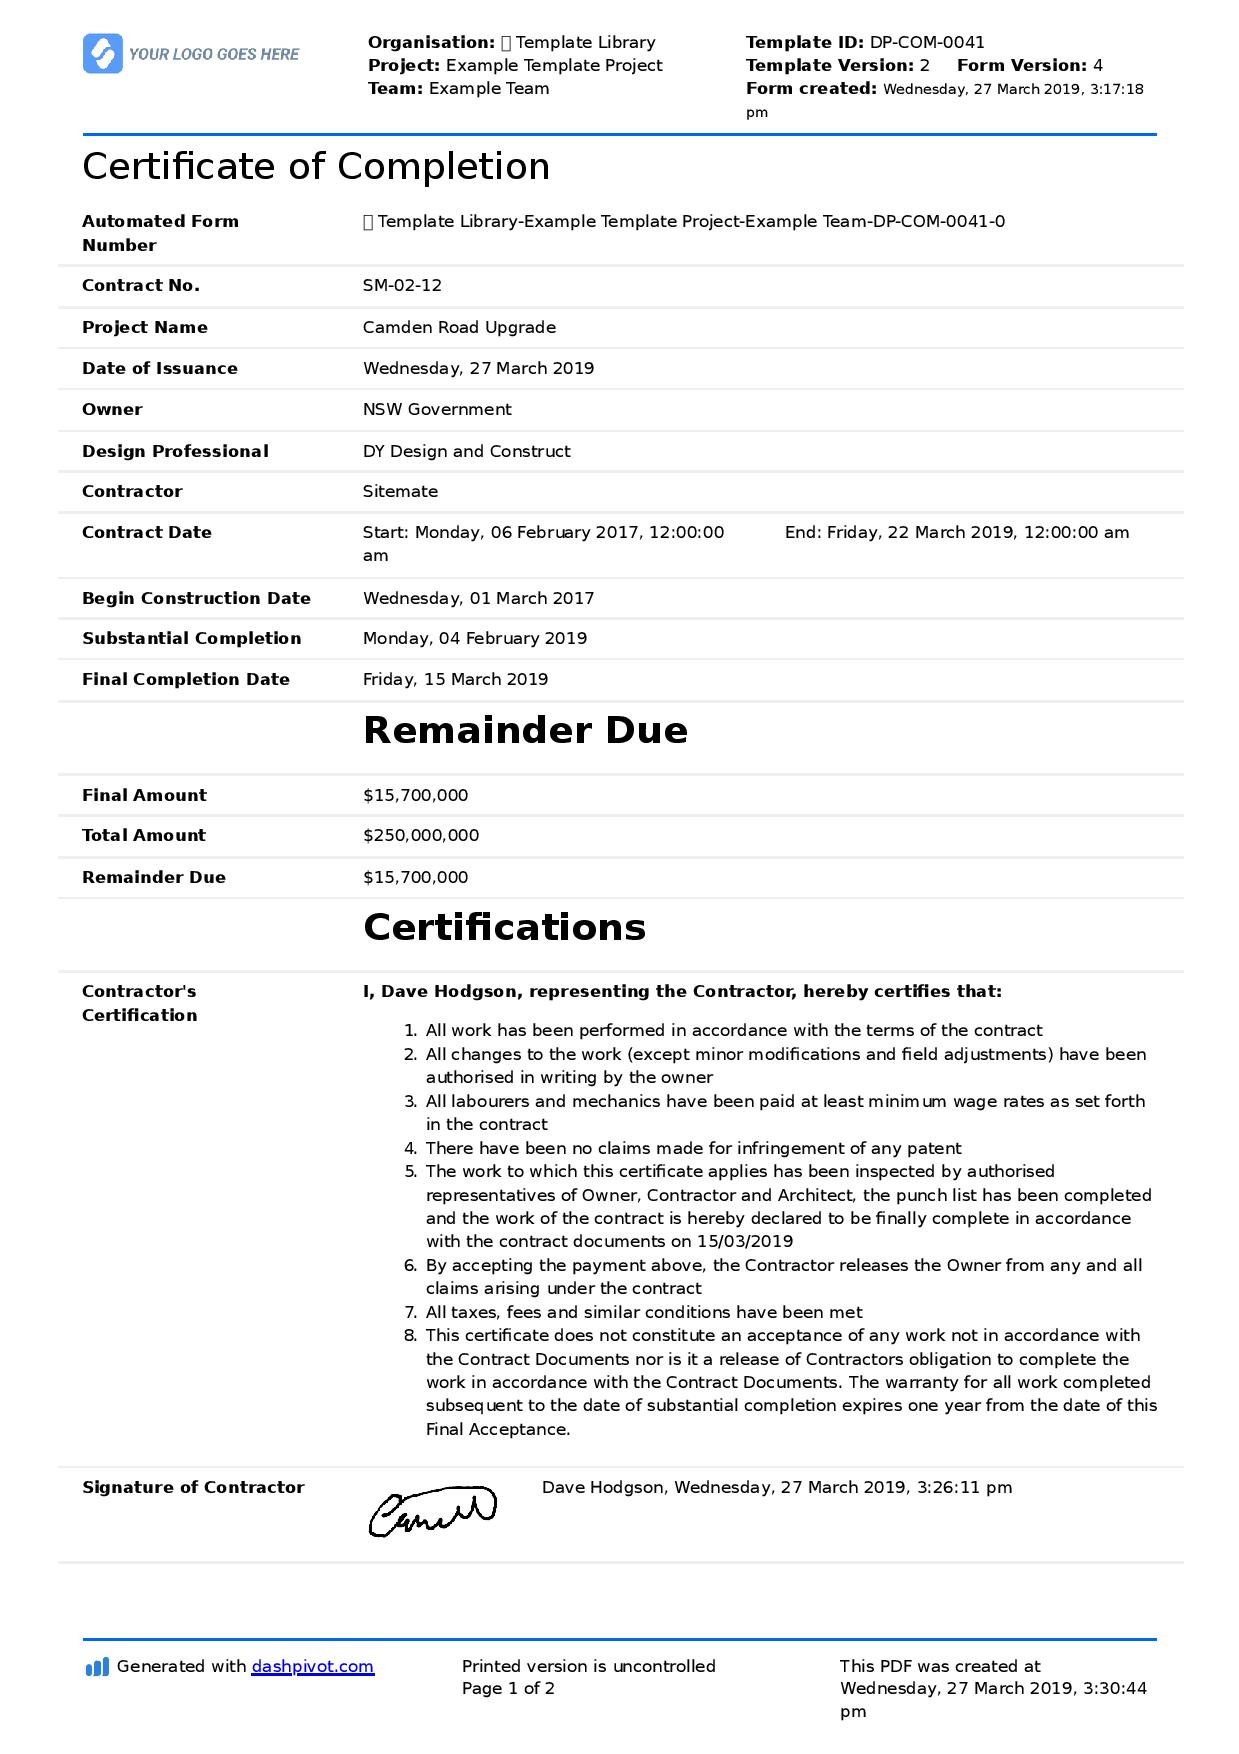 Certificate Of Completion For Construction (Free Template + Sample) intended for Certificate Of Completion Template Construction